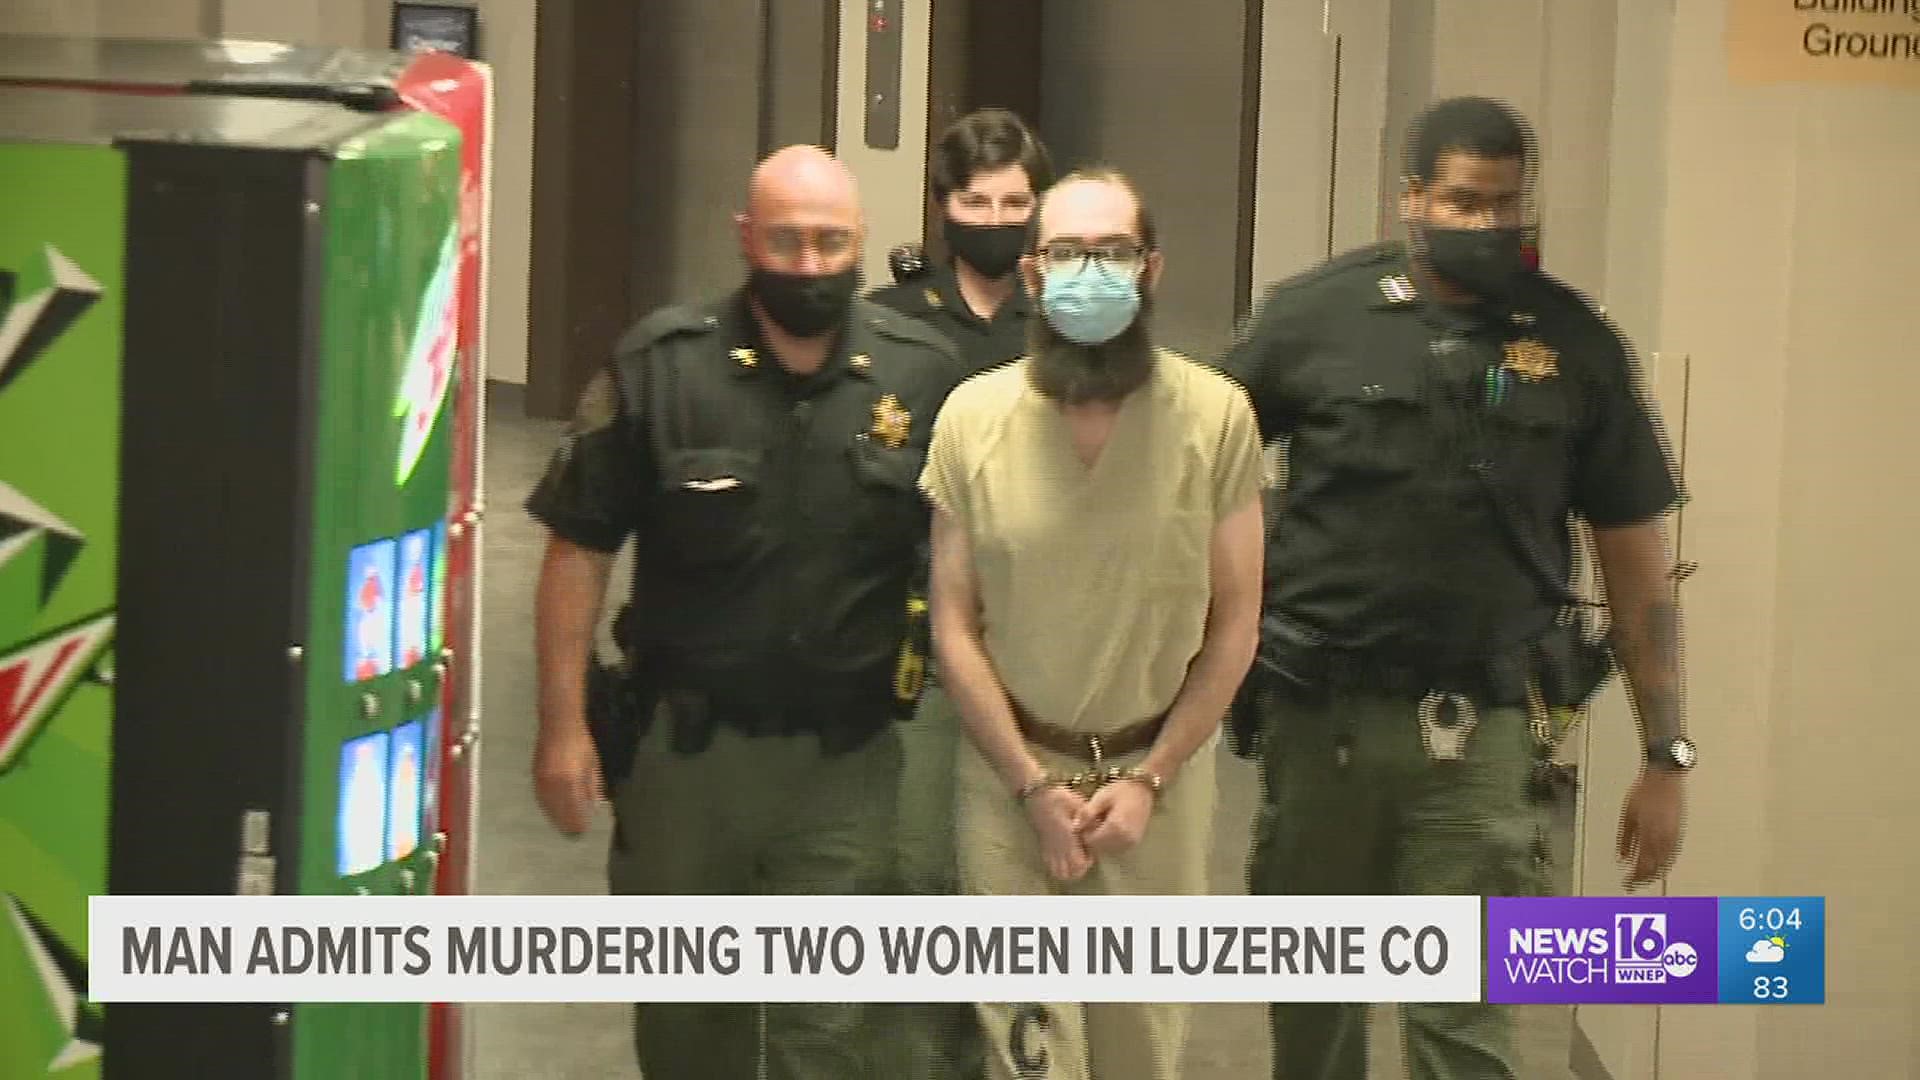 Harold Haulman pleaded guilty on Wednesday to killing two women and has been sentenced to life in prison.